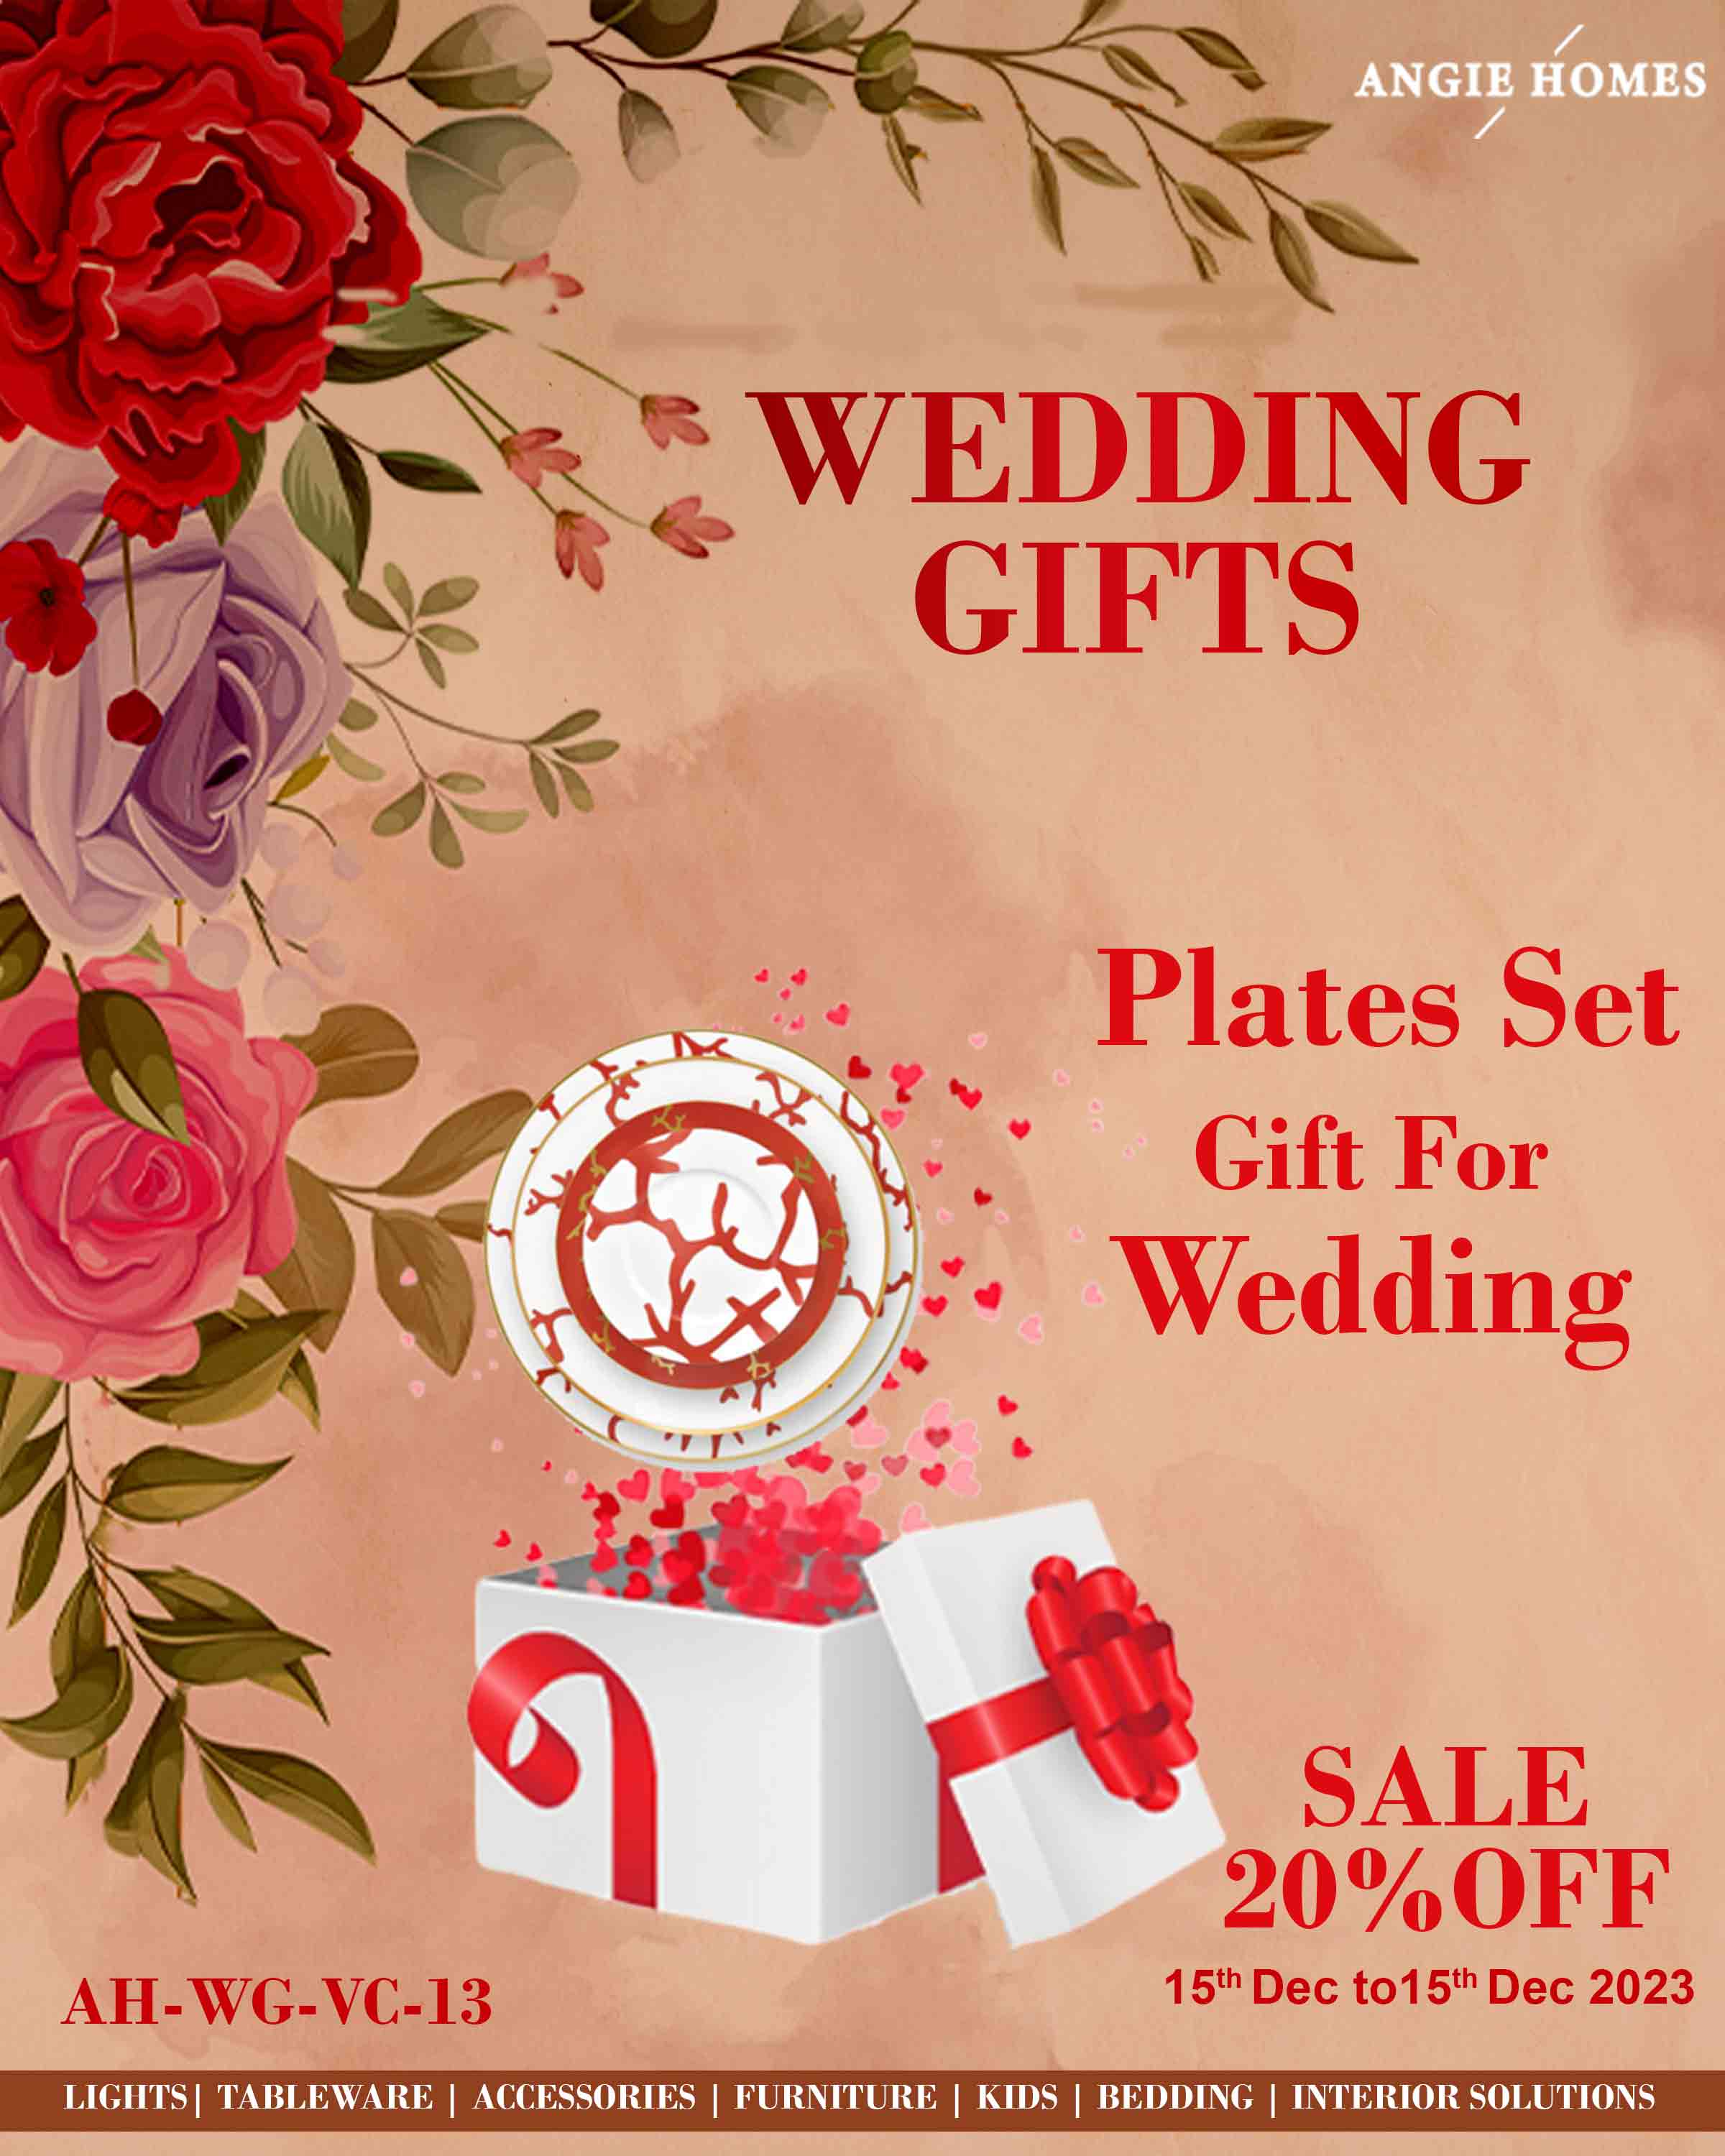 PLATES SET FOR WEDDING GIFTS | MARRIAGE GIFT VOUCHER | PREMIUM GIFTTING ANGIE HOMES